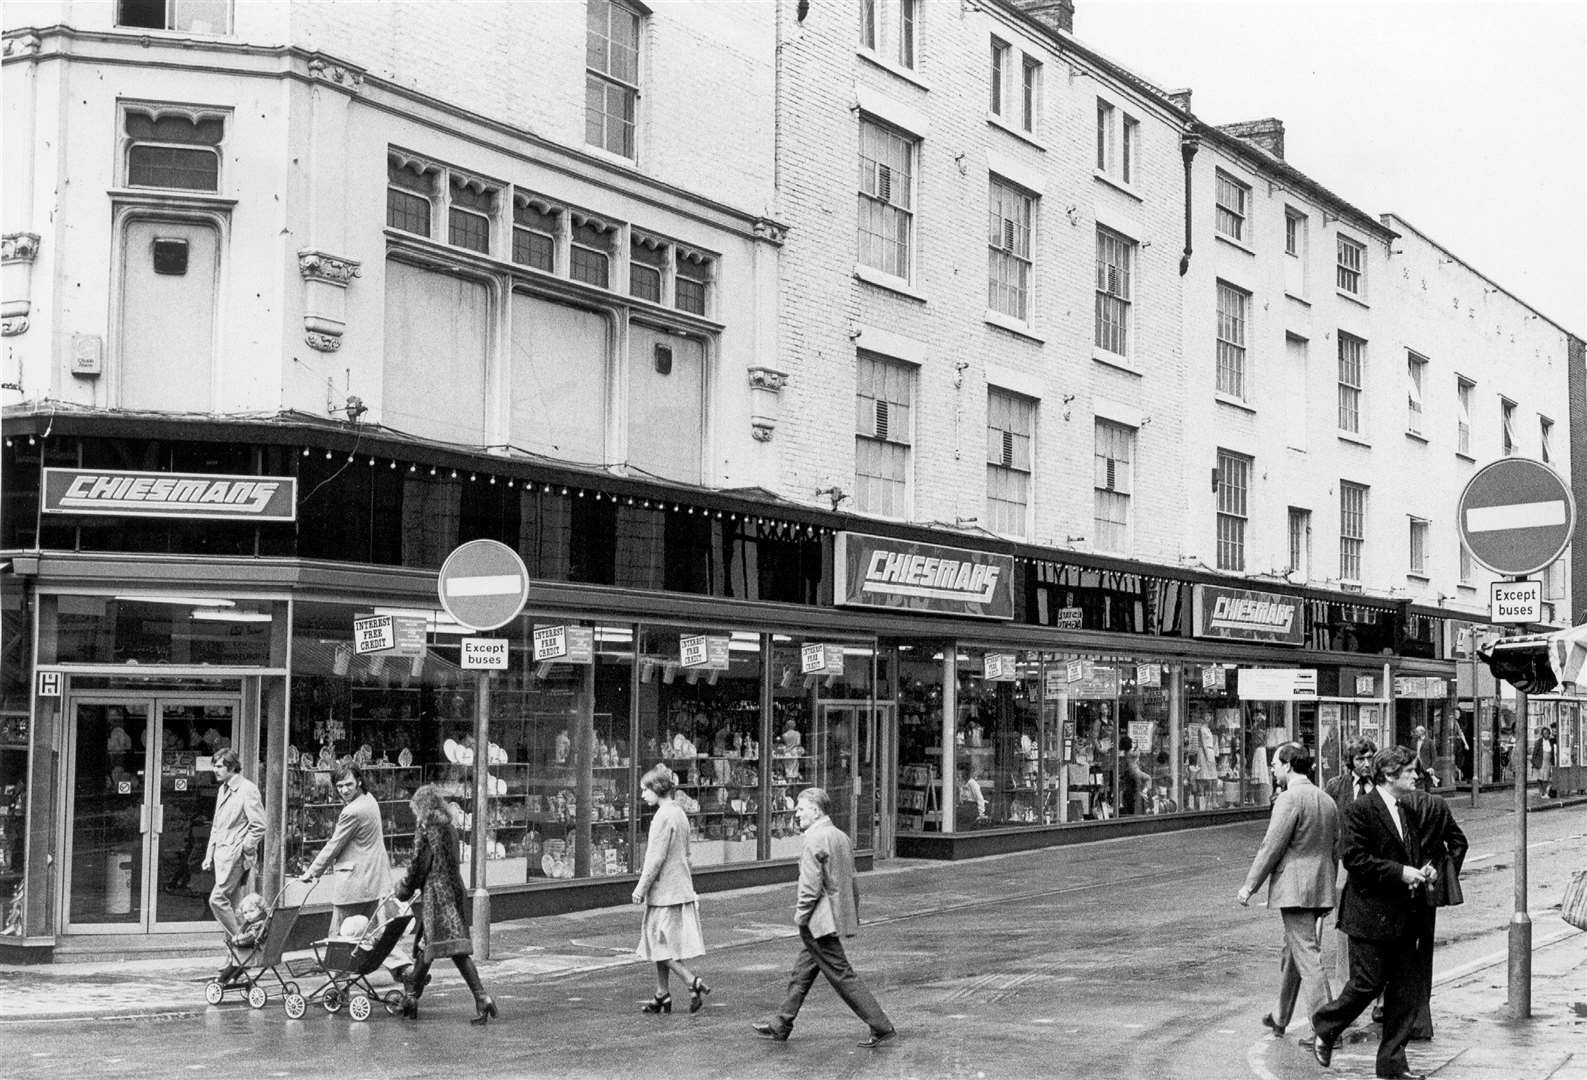 Chiesmans department store in Maidstone in May 1982 - the building is now occupied by The Herbalist bar